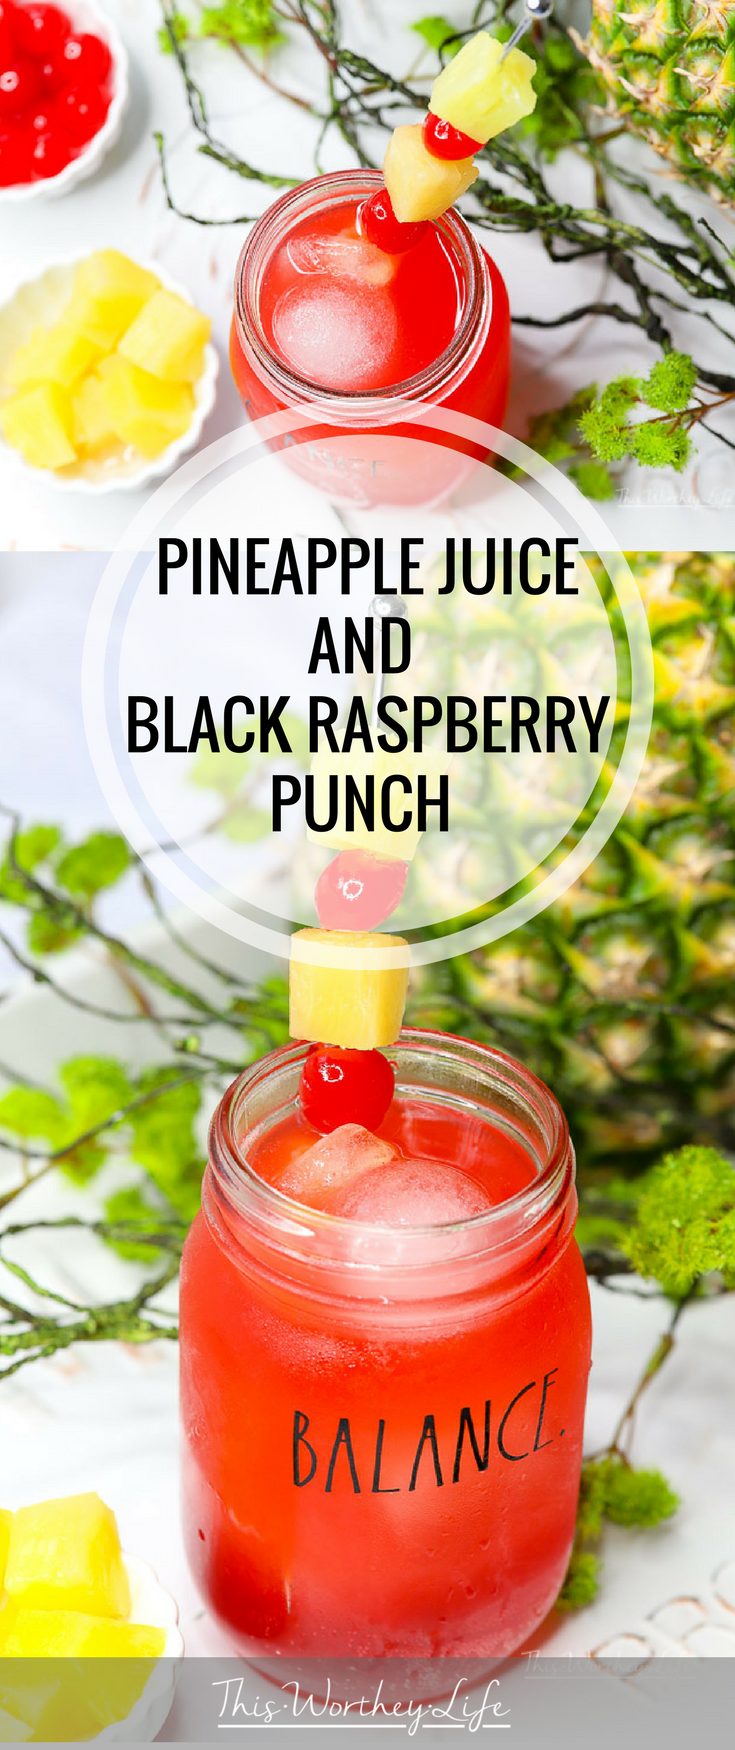 Get ready to cool off with this summer mason jar drink idea. It's a kid-friendly punch with pineapple juice, black raspberry sparkling ice, lavender syrup, and a few other fun ingredients for a sweet, fresh drink! Grab the recipe for this summer mocktail on the blog.